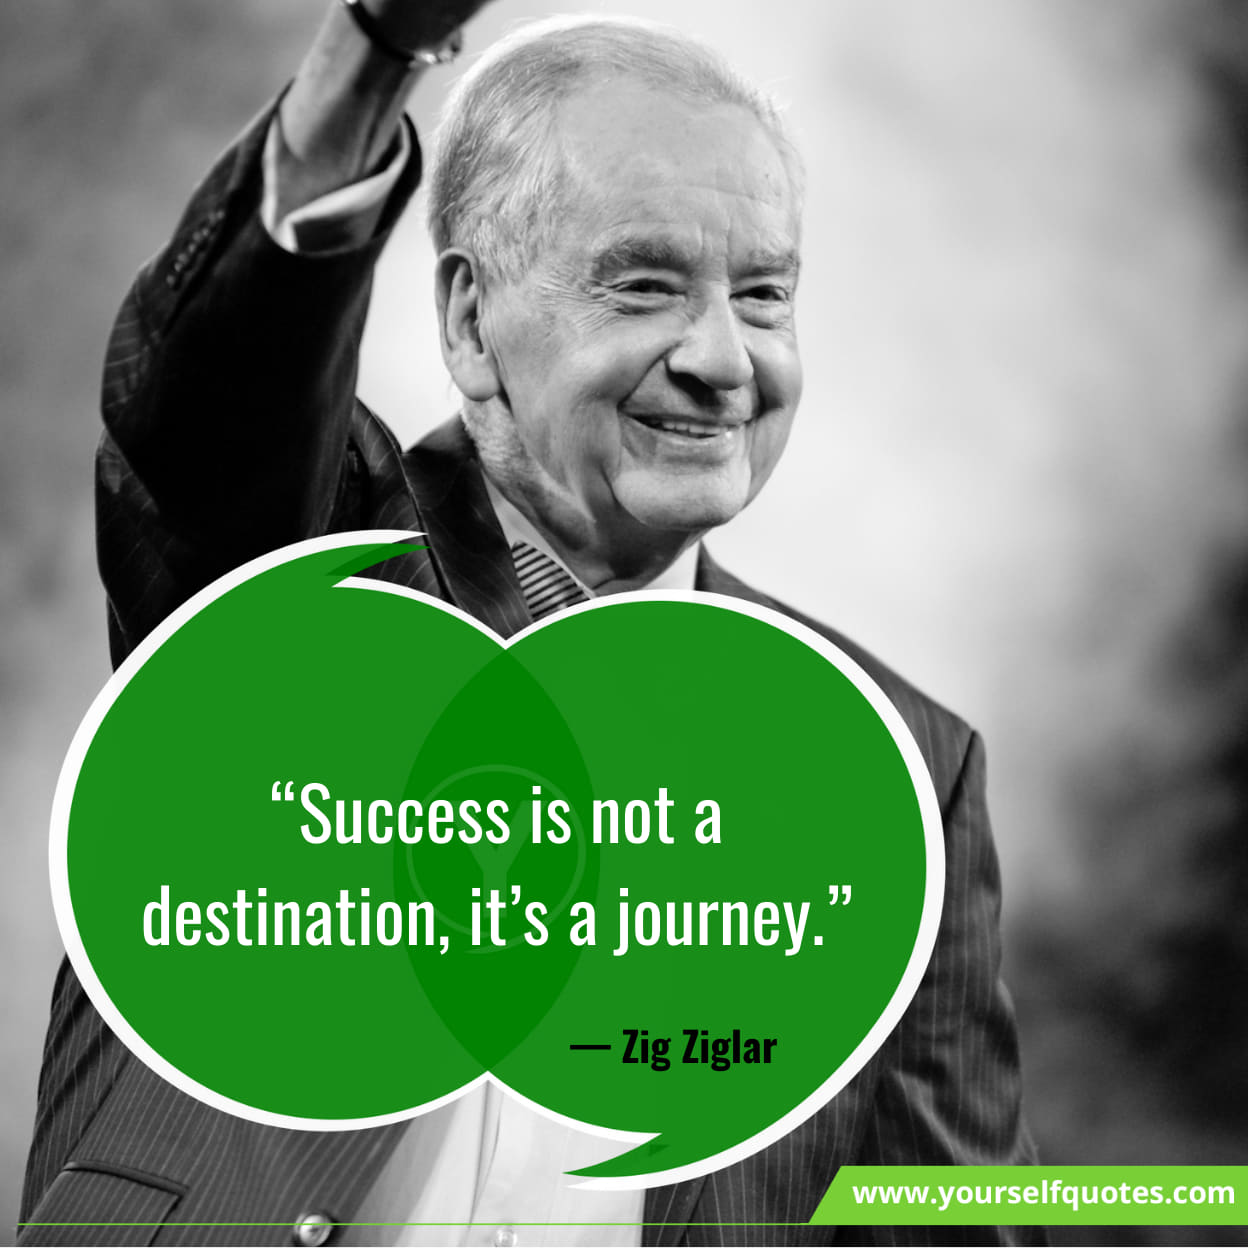 Successful Quotes From Successful People's